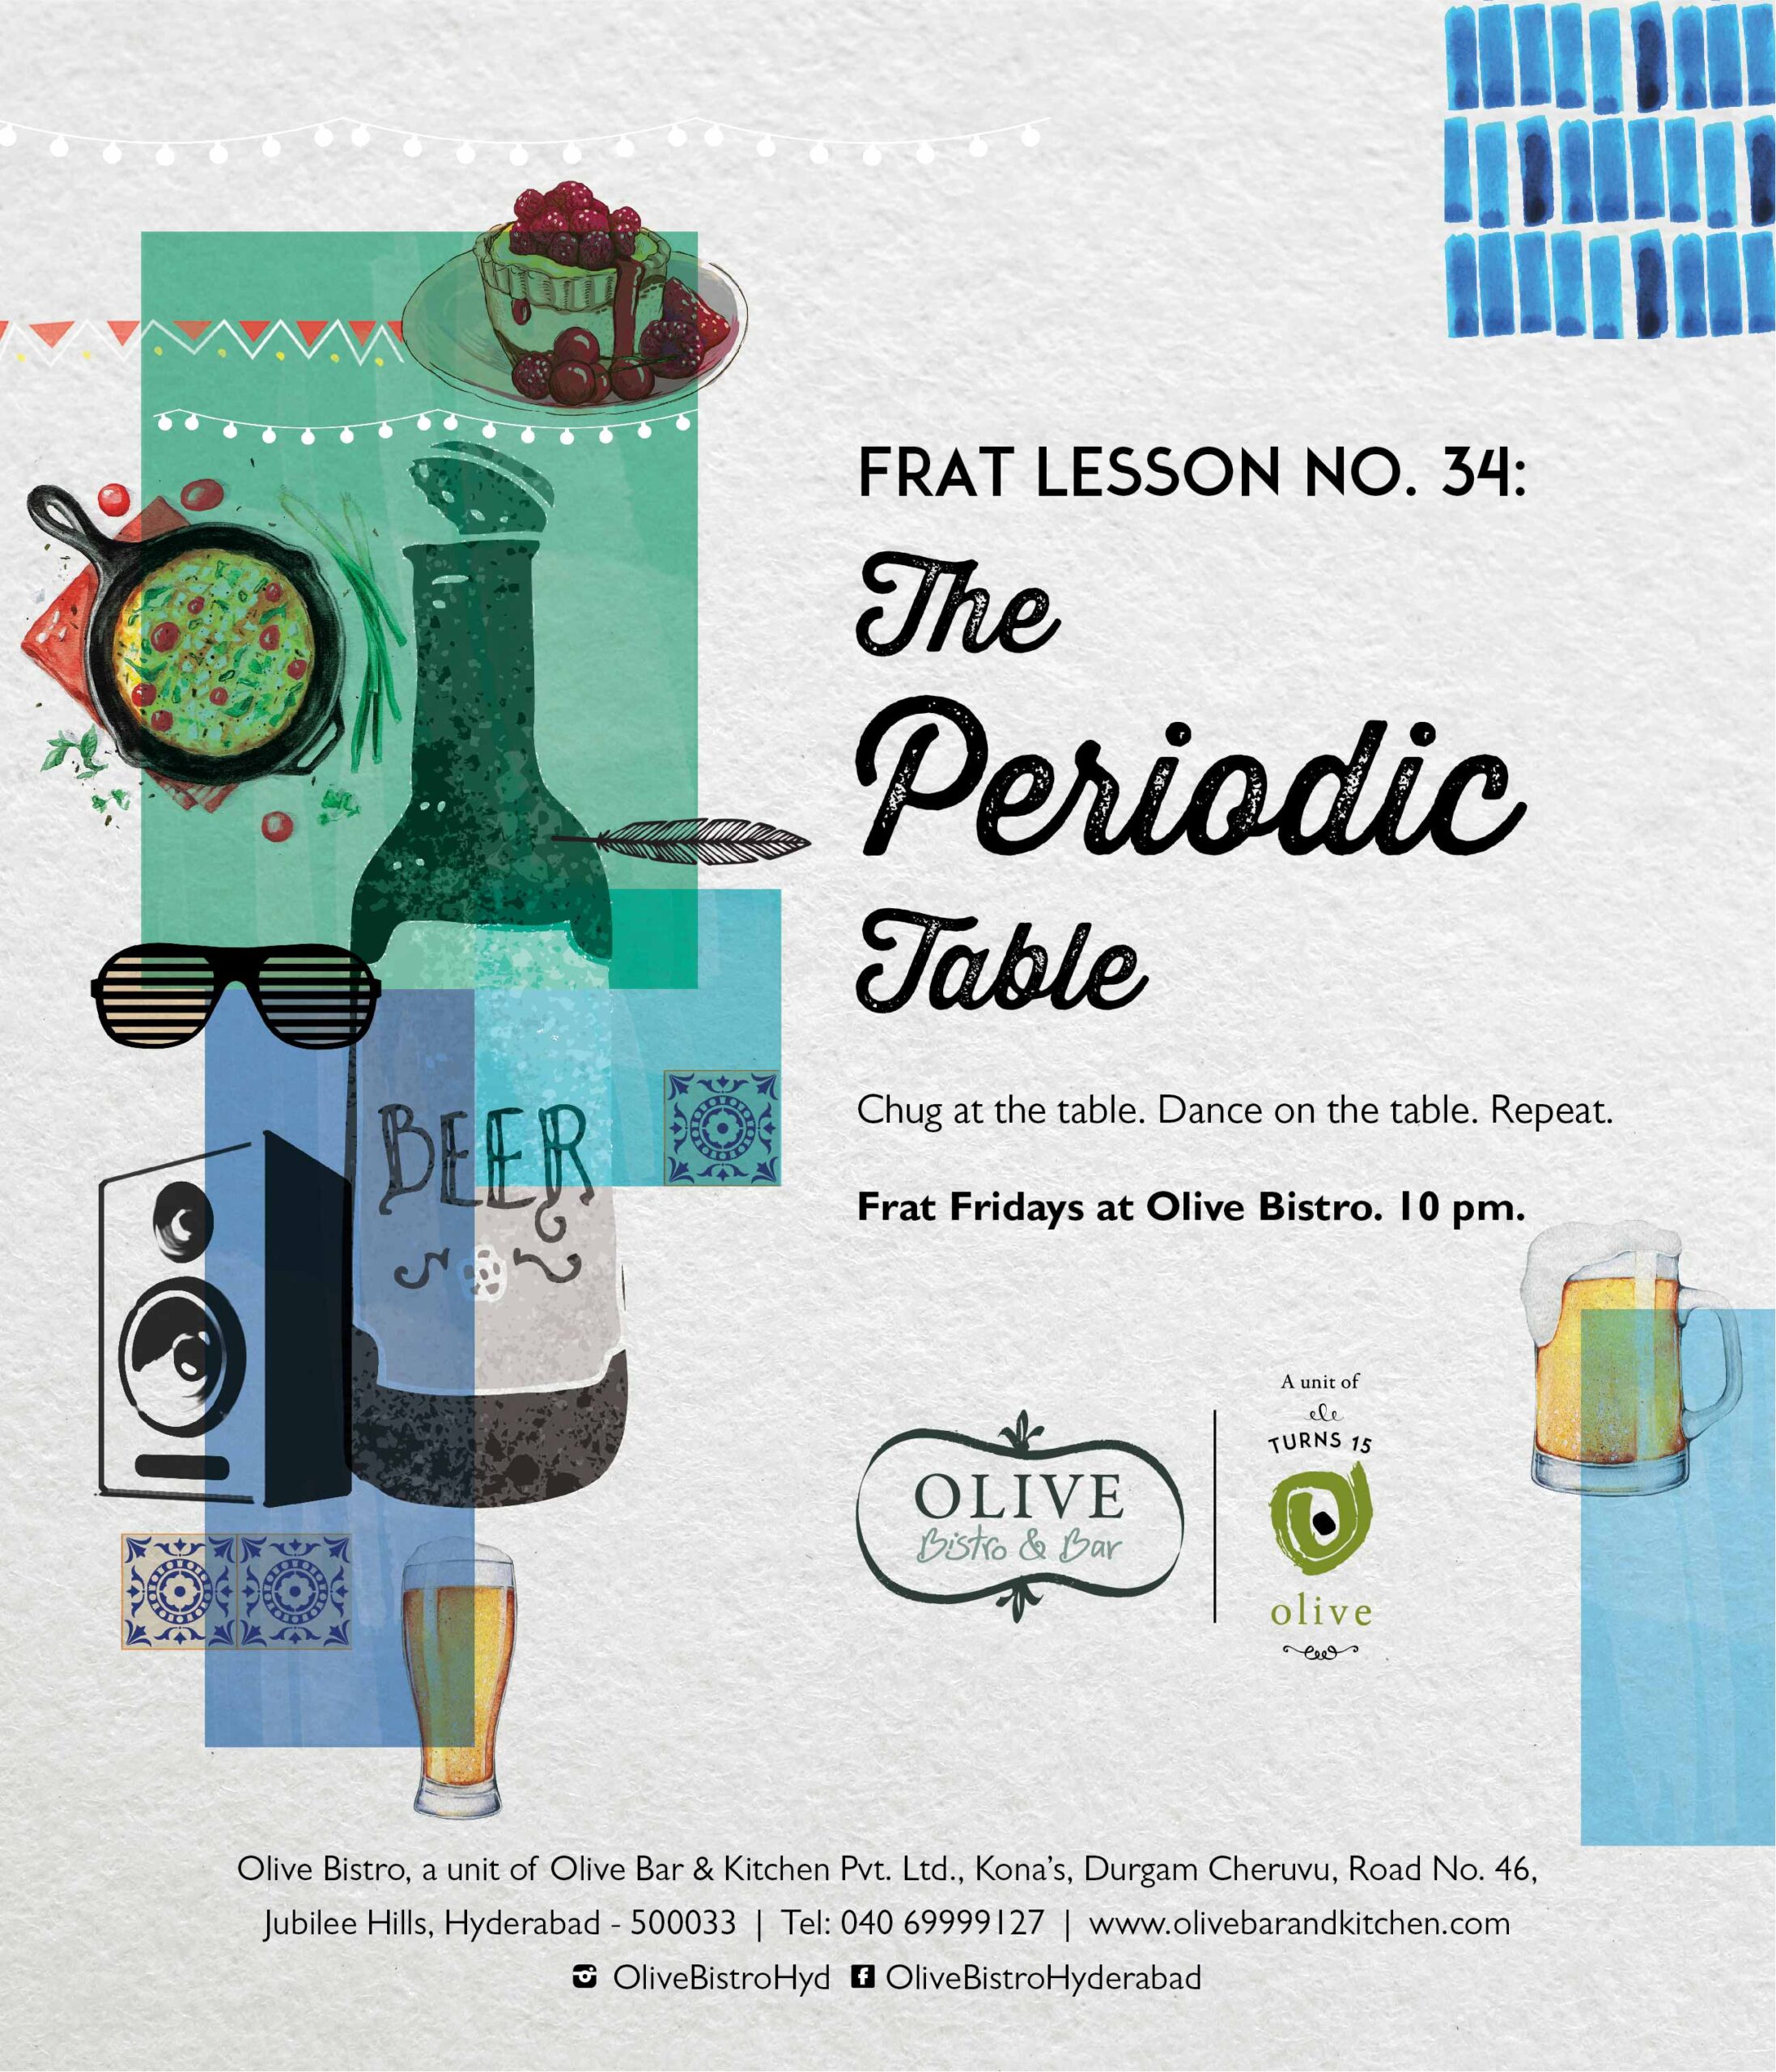 This poster for Frat Fridays at Olive Bistro, Hyderabad is an ode to the chemistry between a person, alcohol and the table.